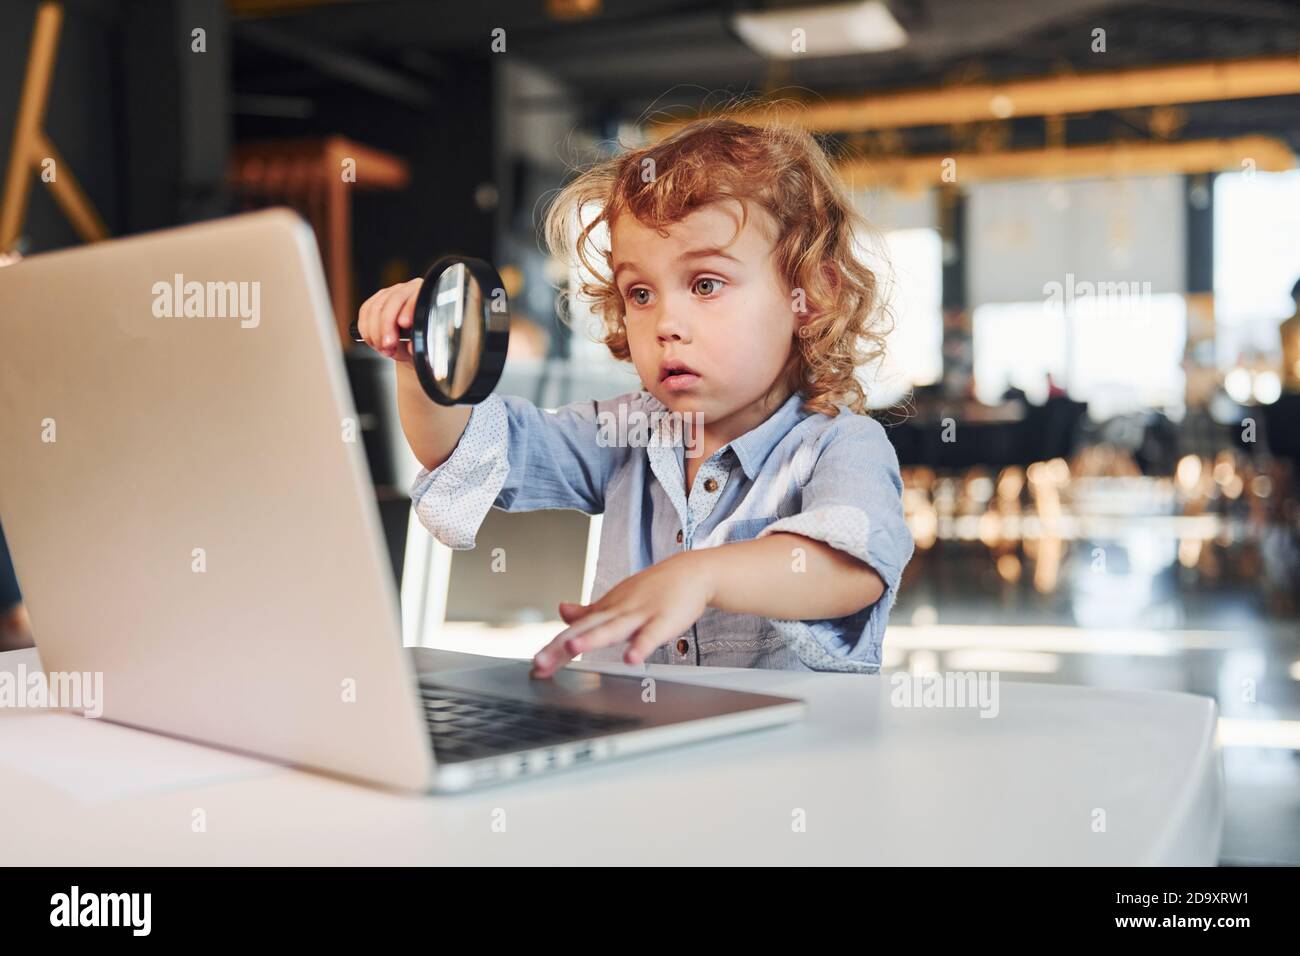 Smart child in casual clothes with laptop on table have fun with magnifying glass Stock Photo